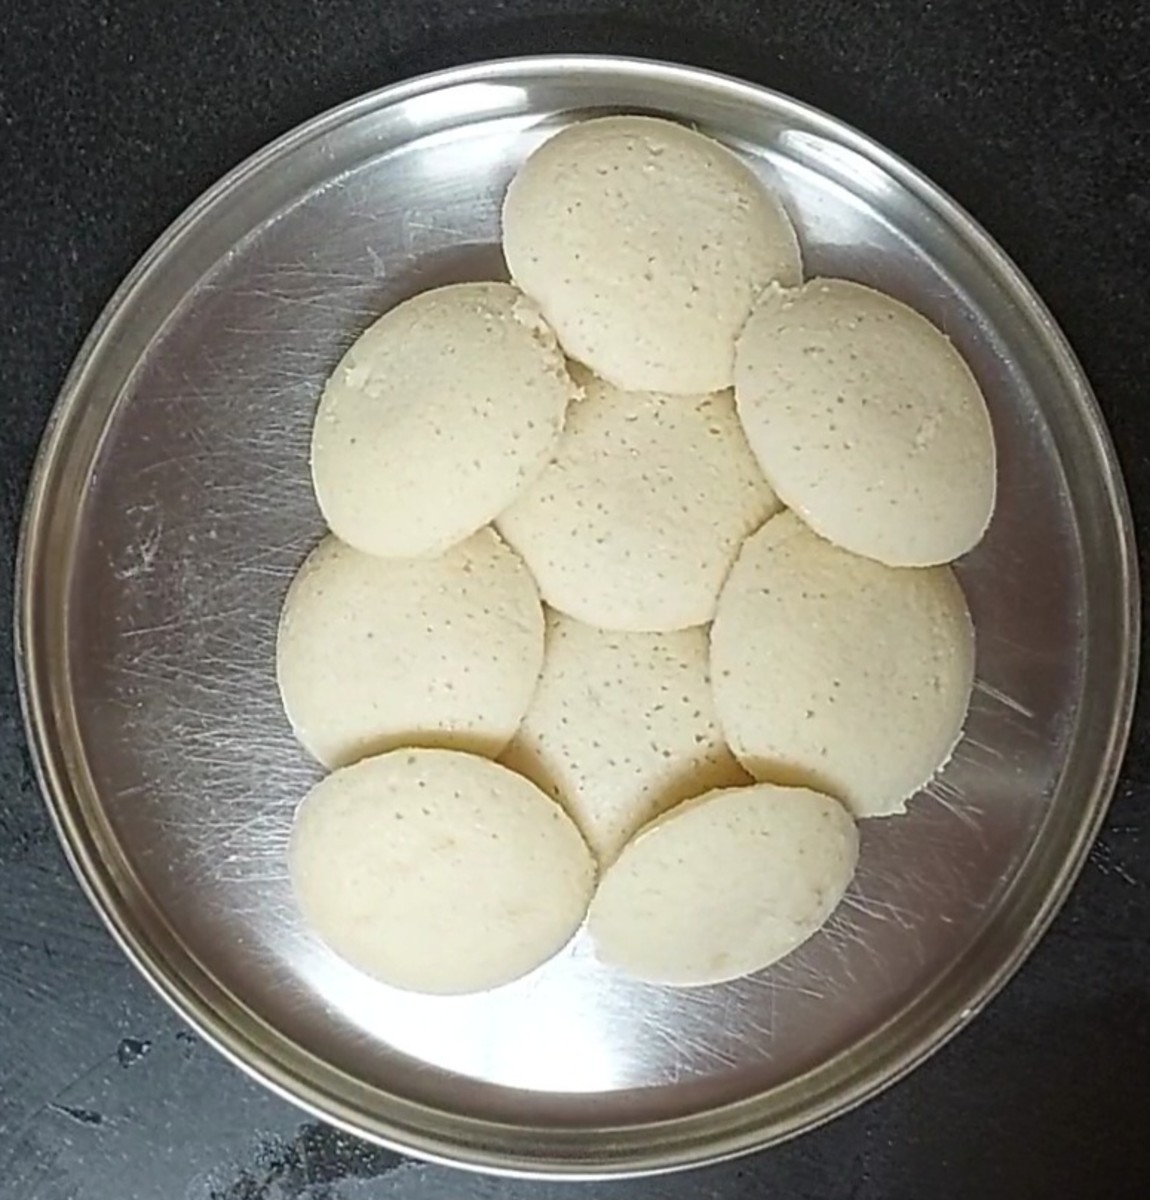 Soft and pluffy instant rava idlis are ready to serve. Serve hot with chutney or sambar and enjoy.